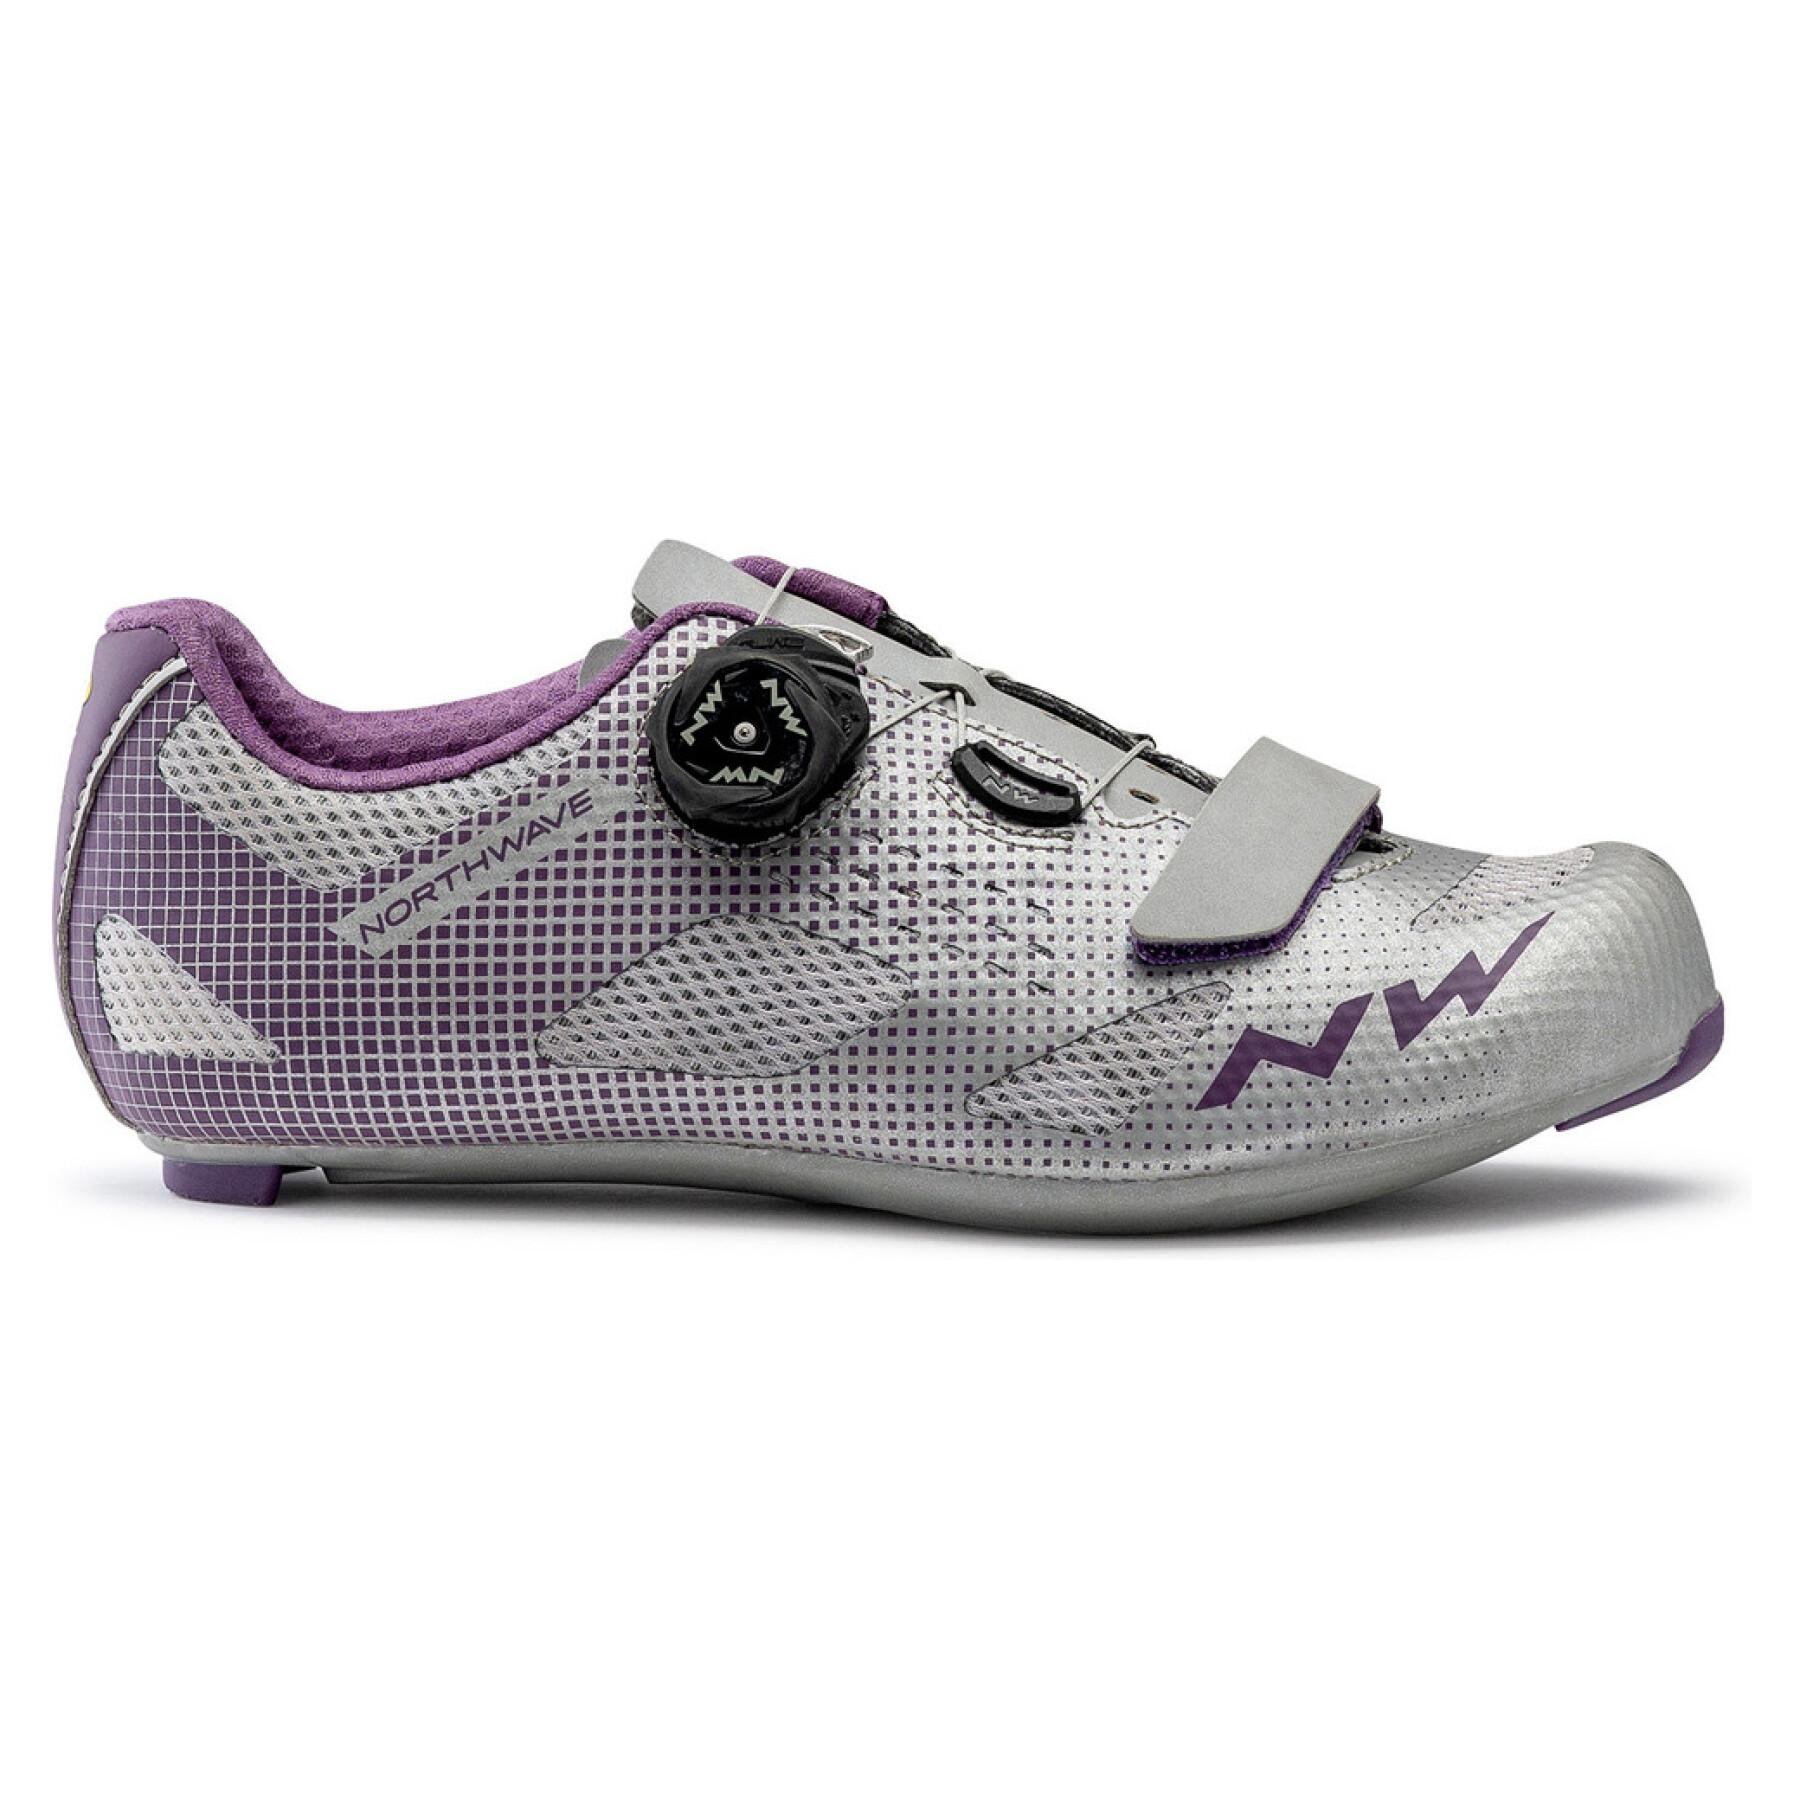 Women's cycling shoes Northwave storm